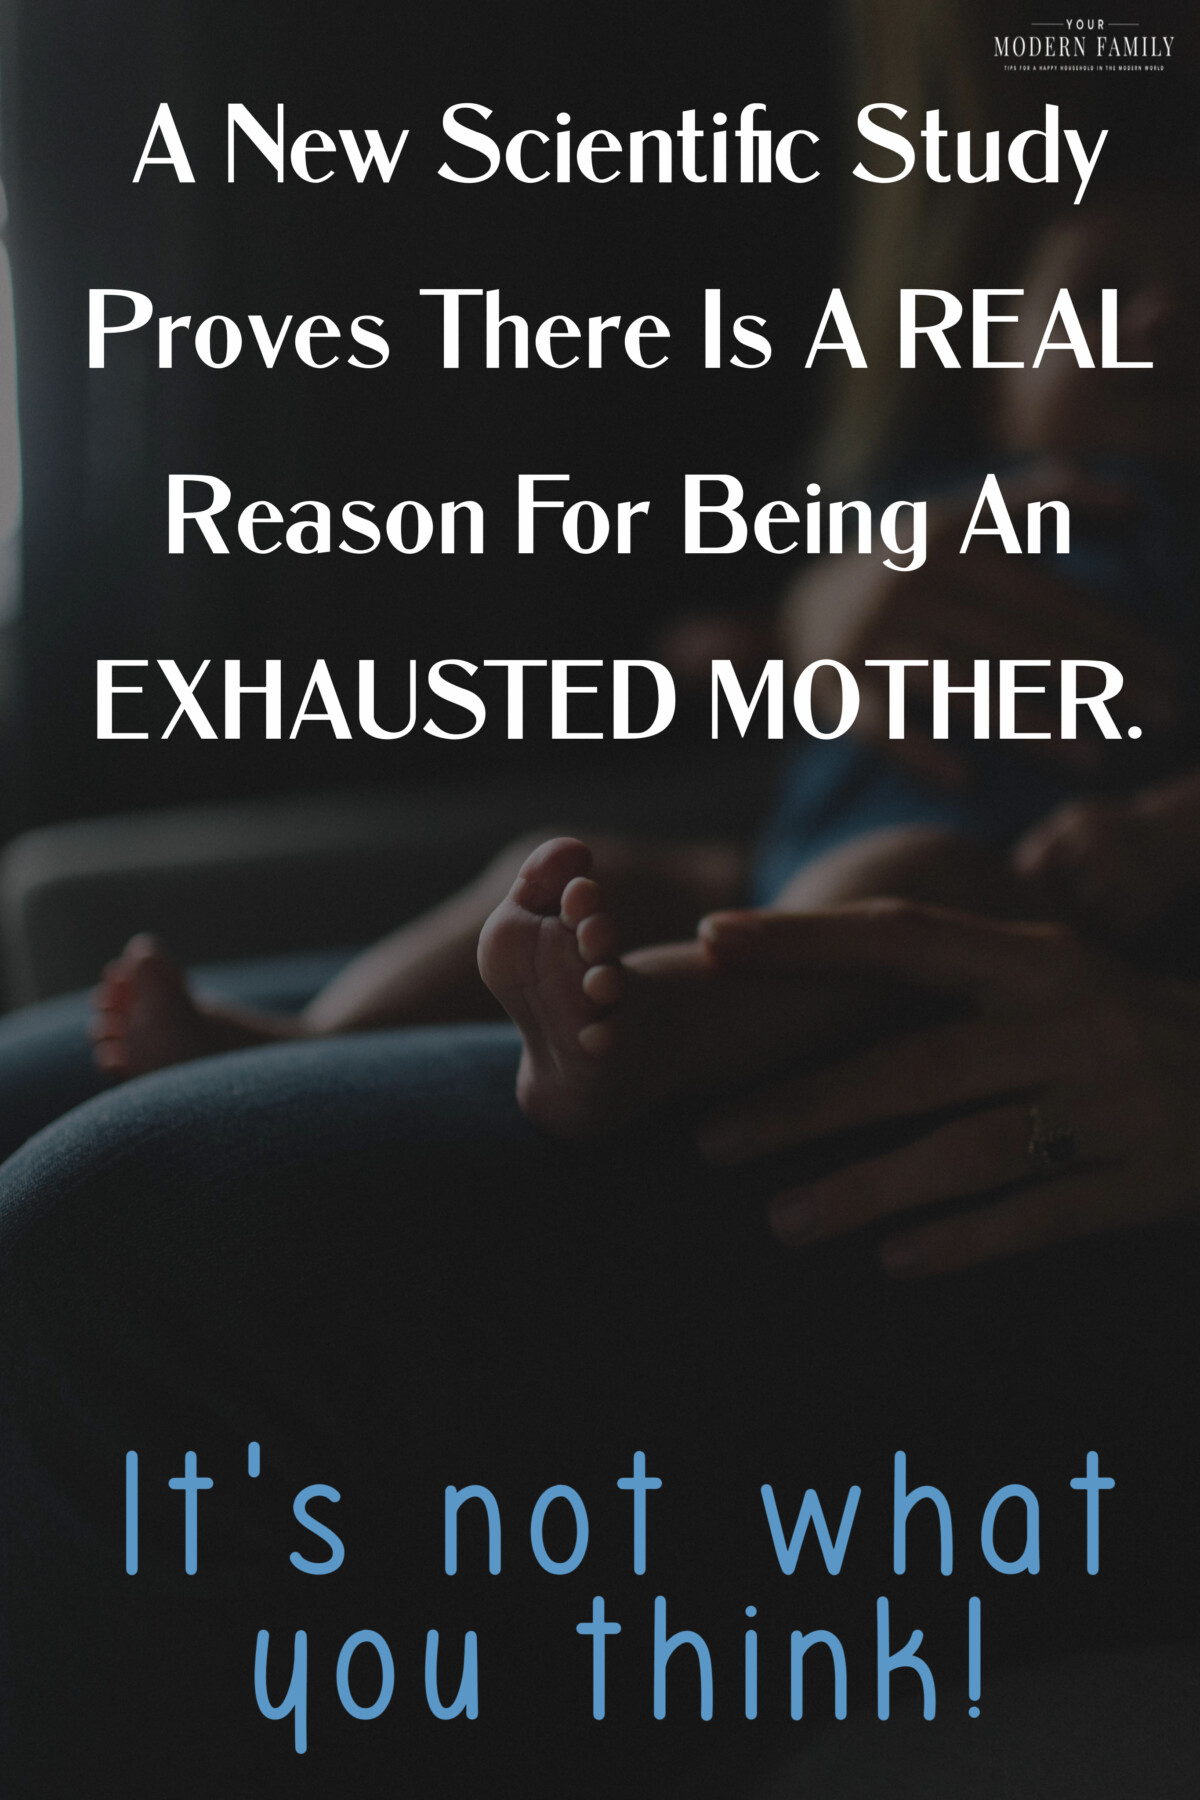 Reason for being an exhausted mother